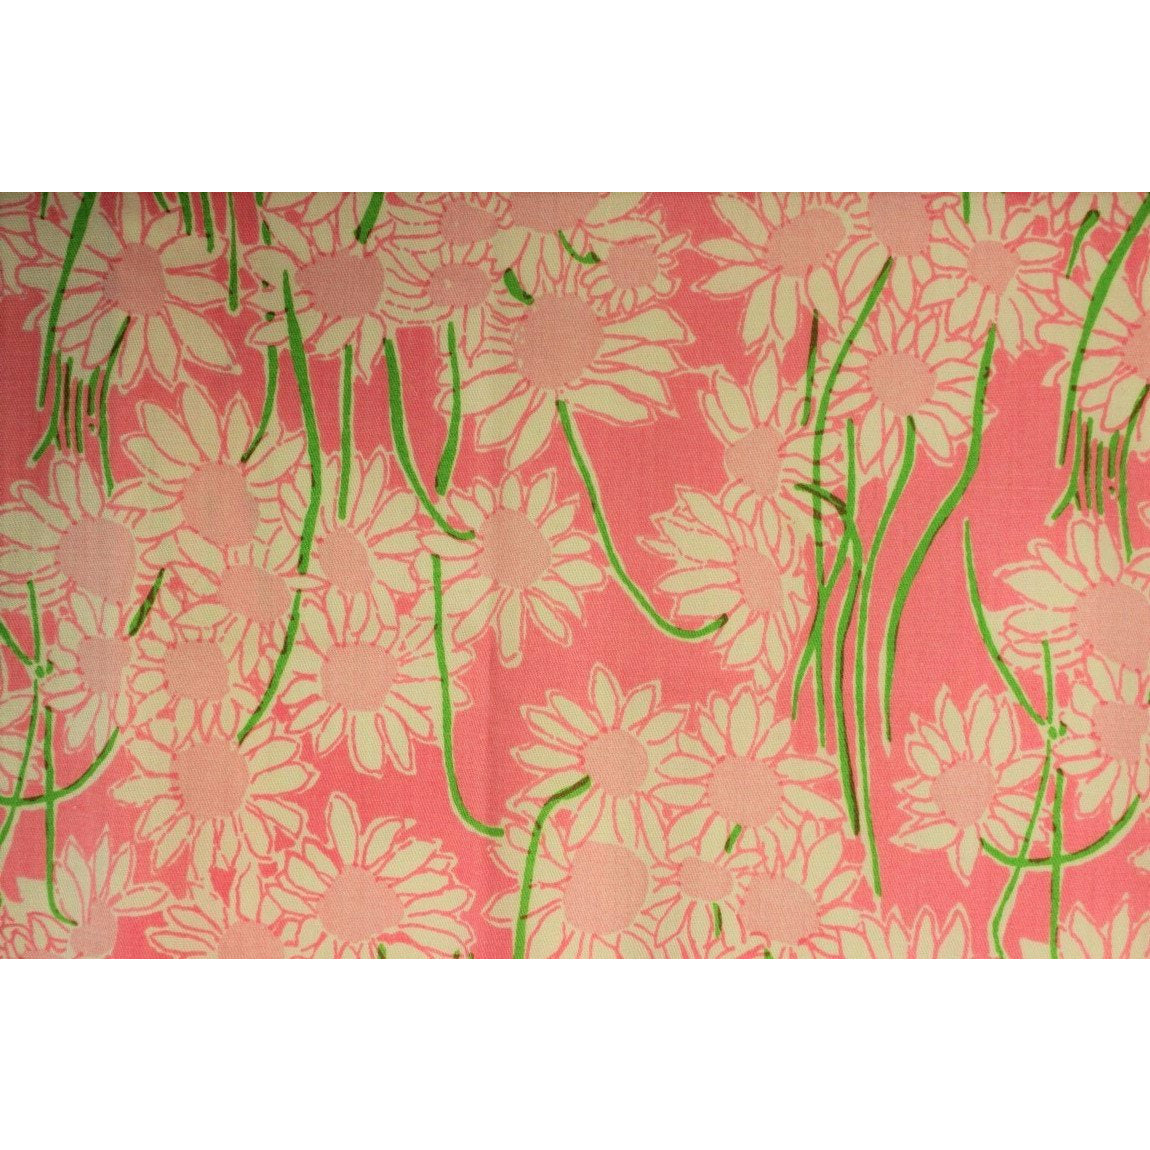 Set of 4 Lilly Pulitzer Pink & Lime Floral Print Curtain Panels